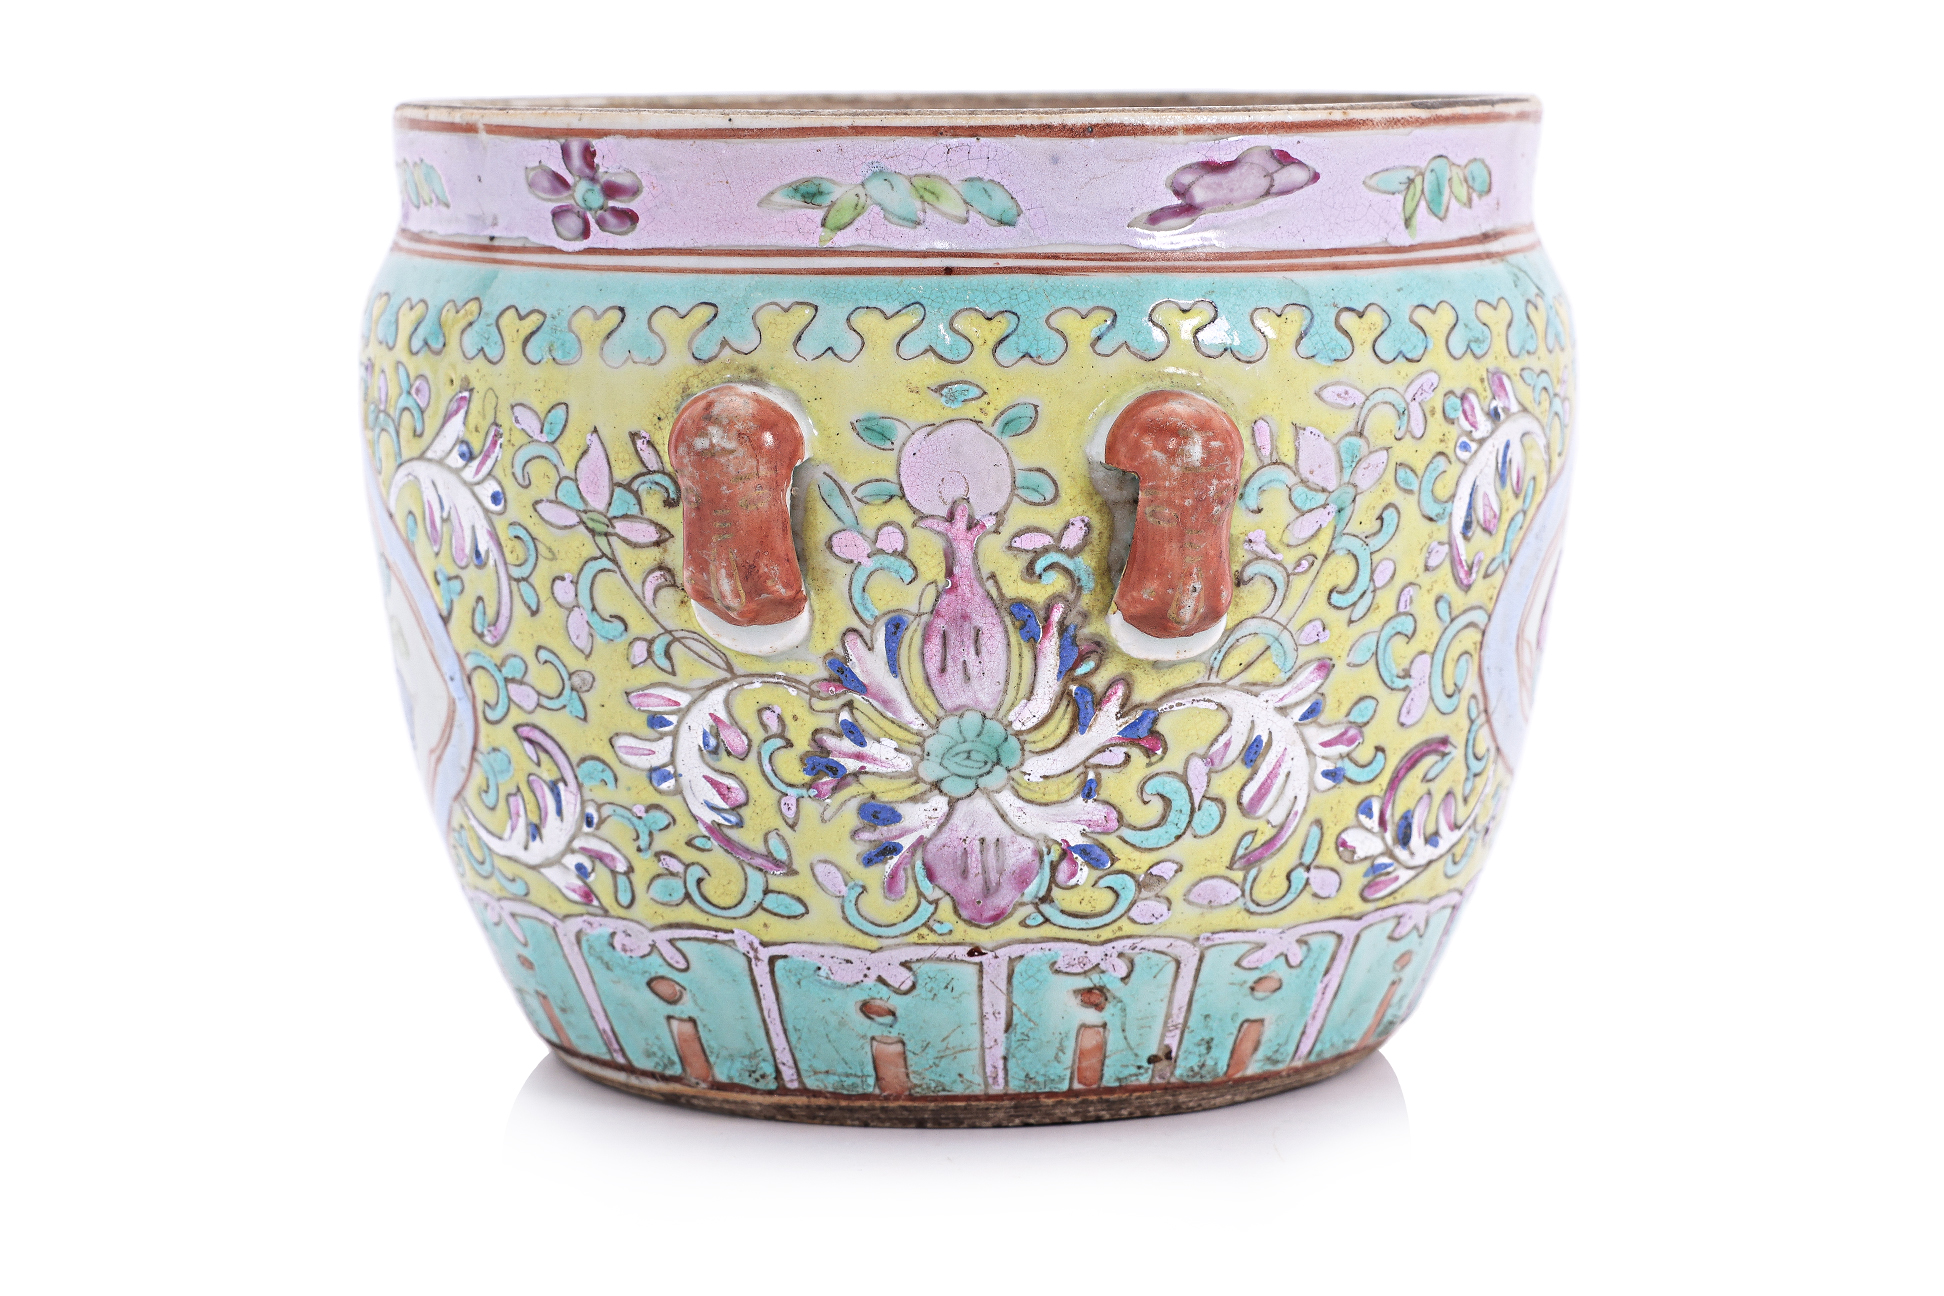 A SMALL FAMILLE ROSE PORCELAIN KAMCHENG BOWL - Image 2 of 3